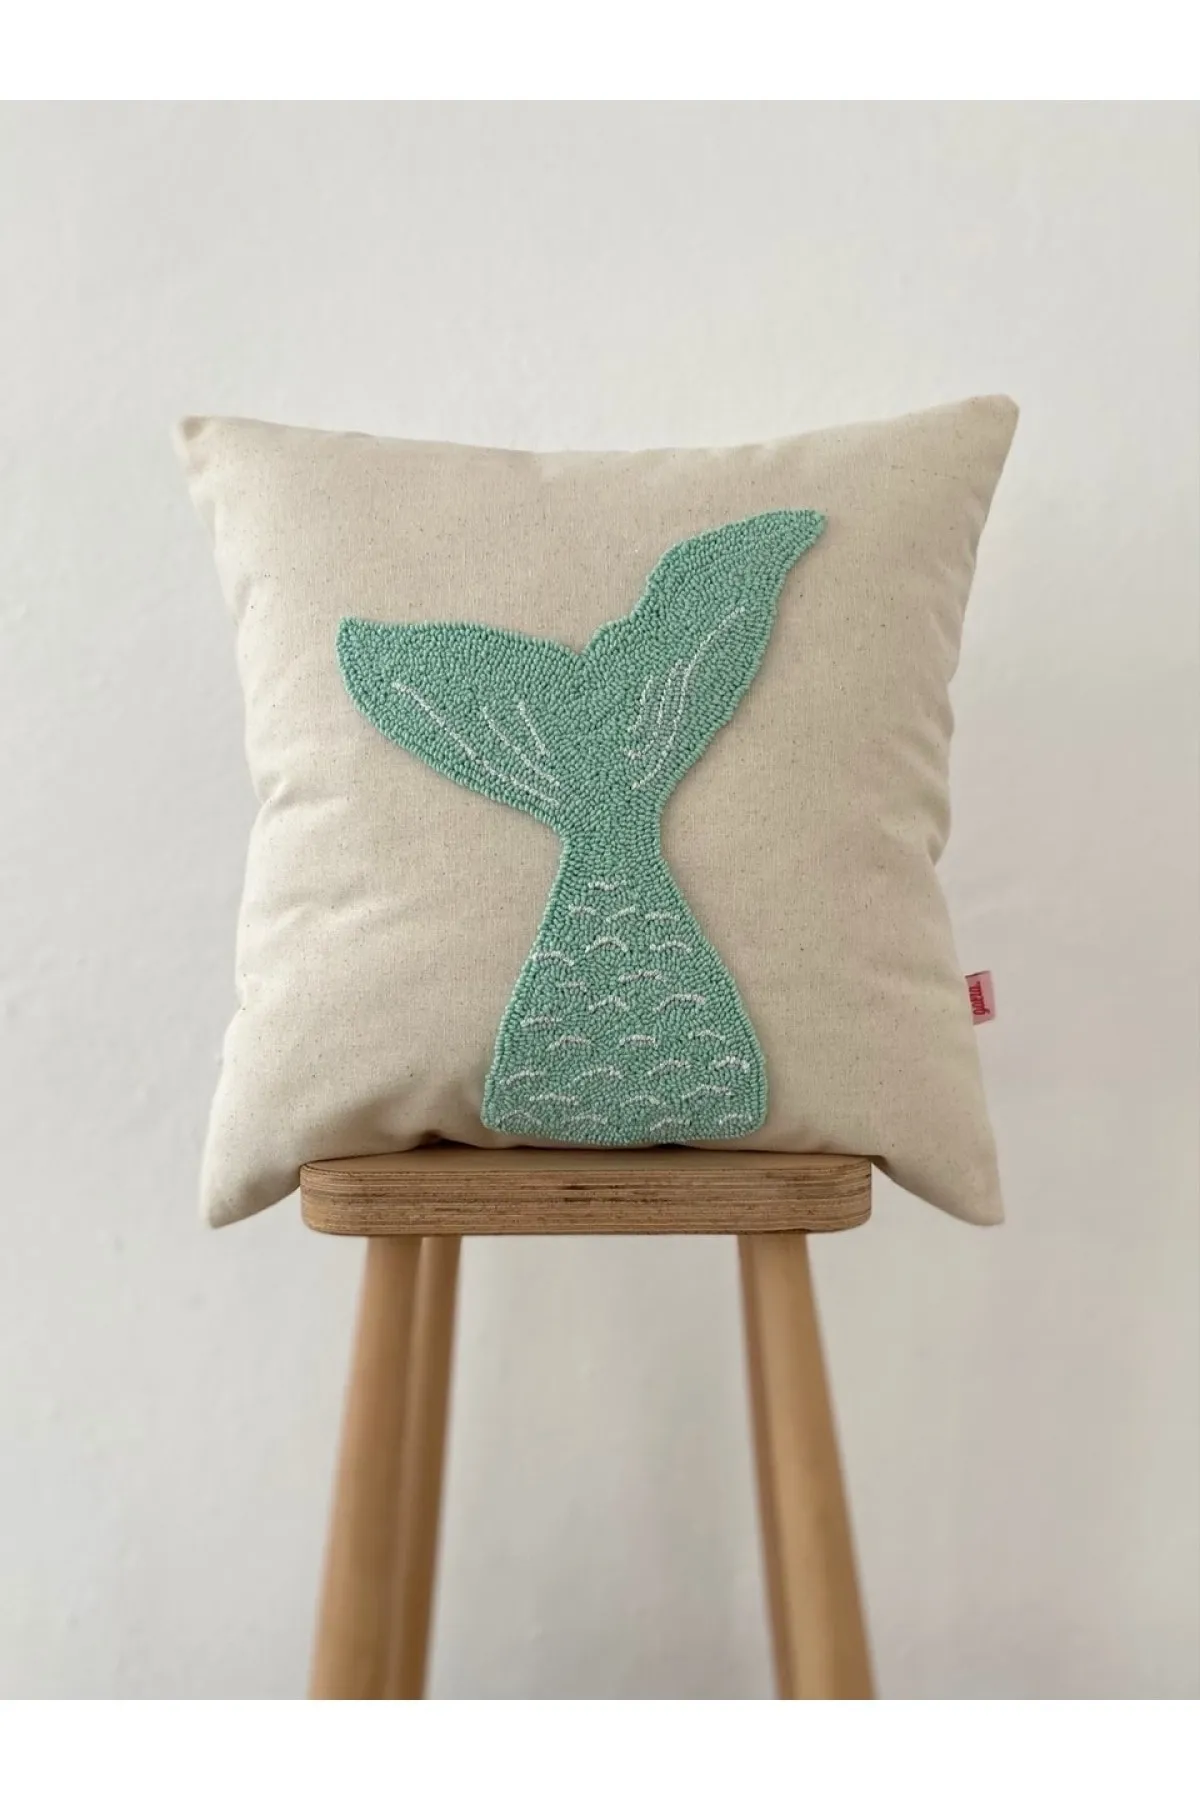 Marin Series Mermaid Washed Linen Punch Throw Pillow Cover